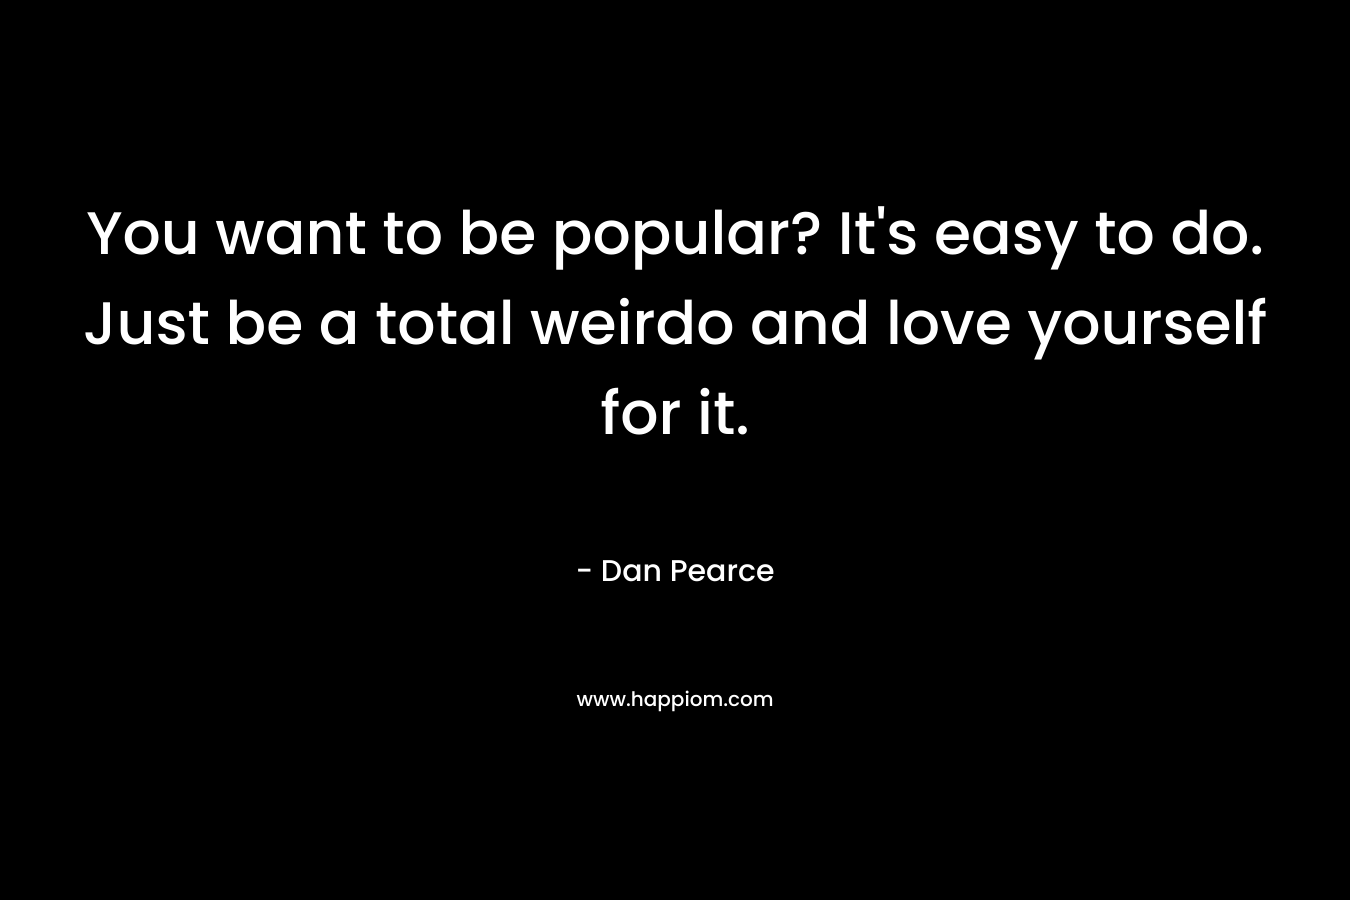 You want to be popular? It's easy to do. Just be a total weirdo and love yourself for it.